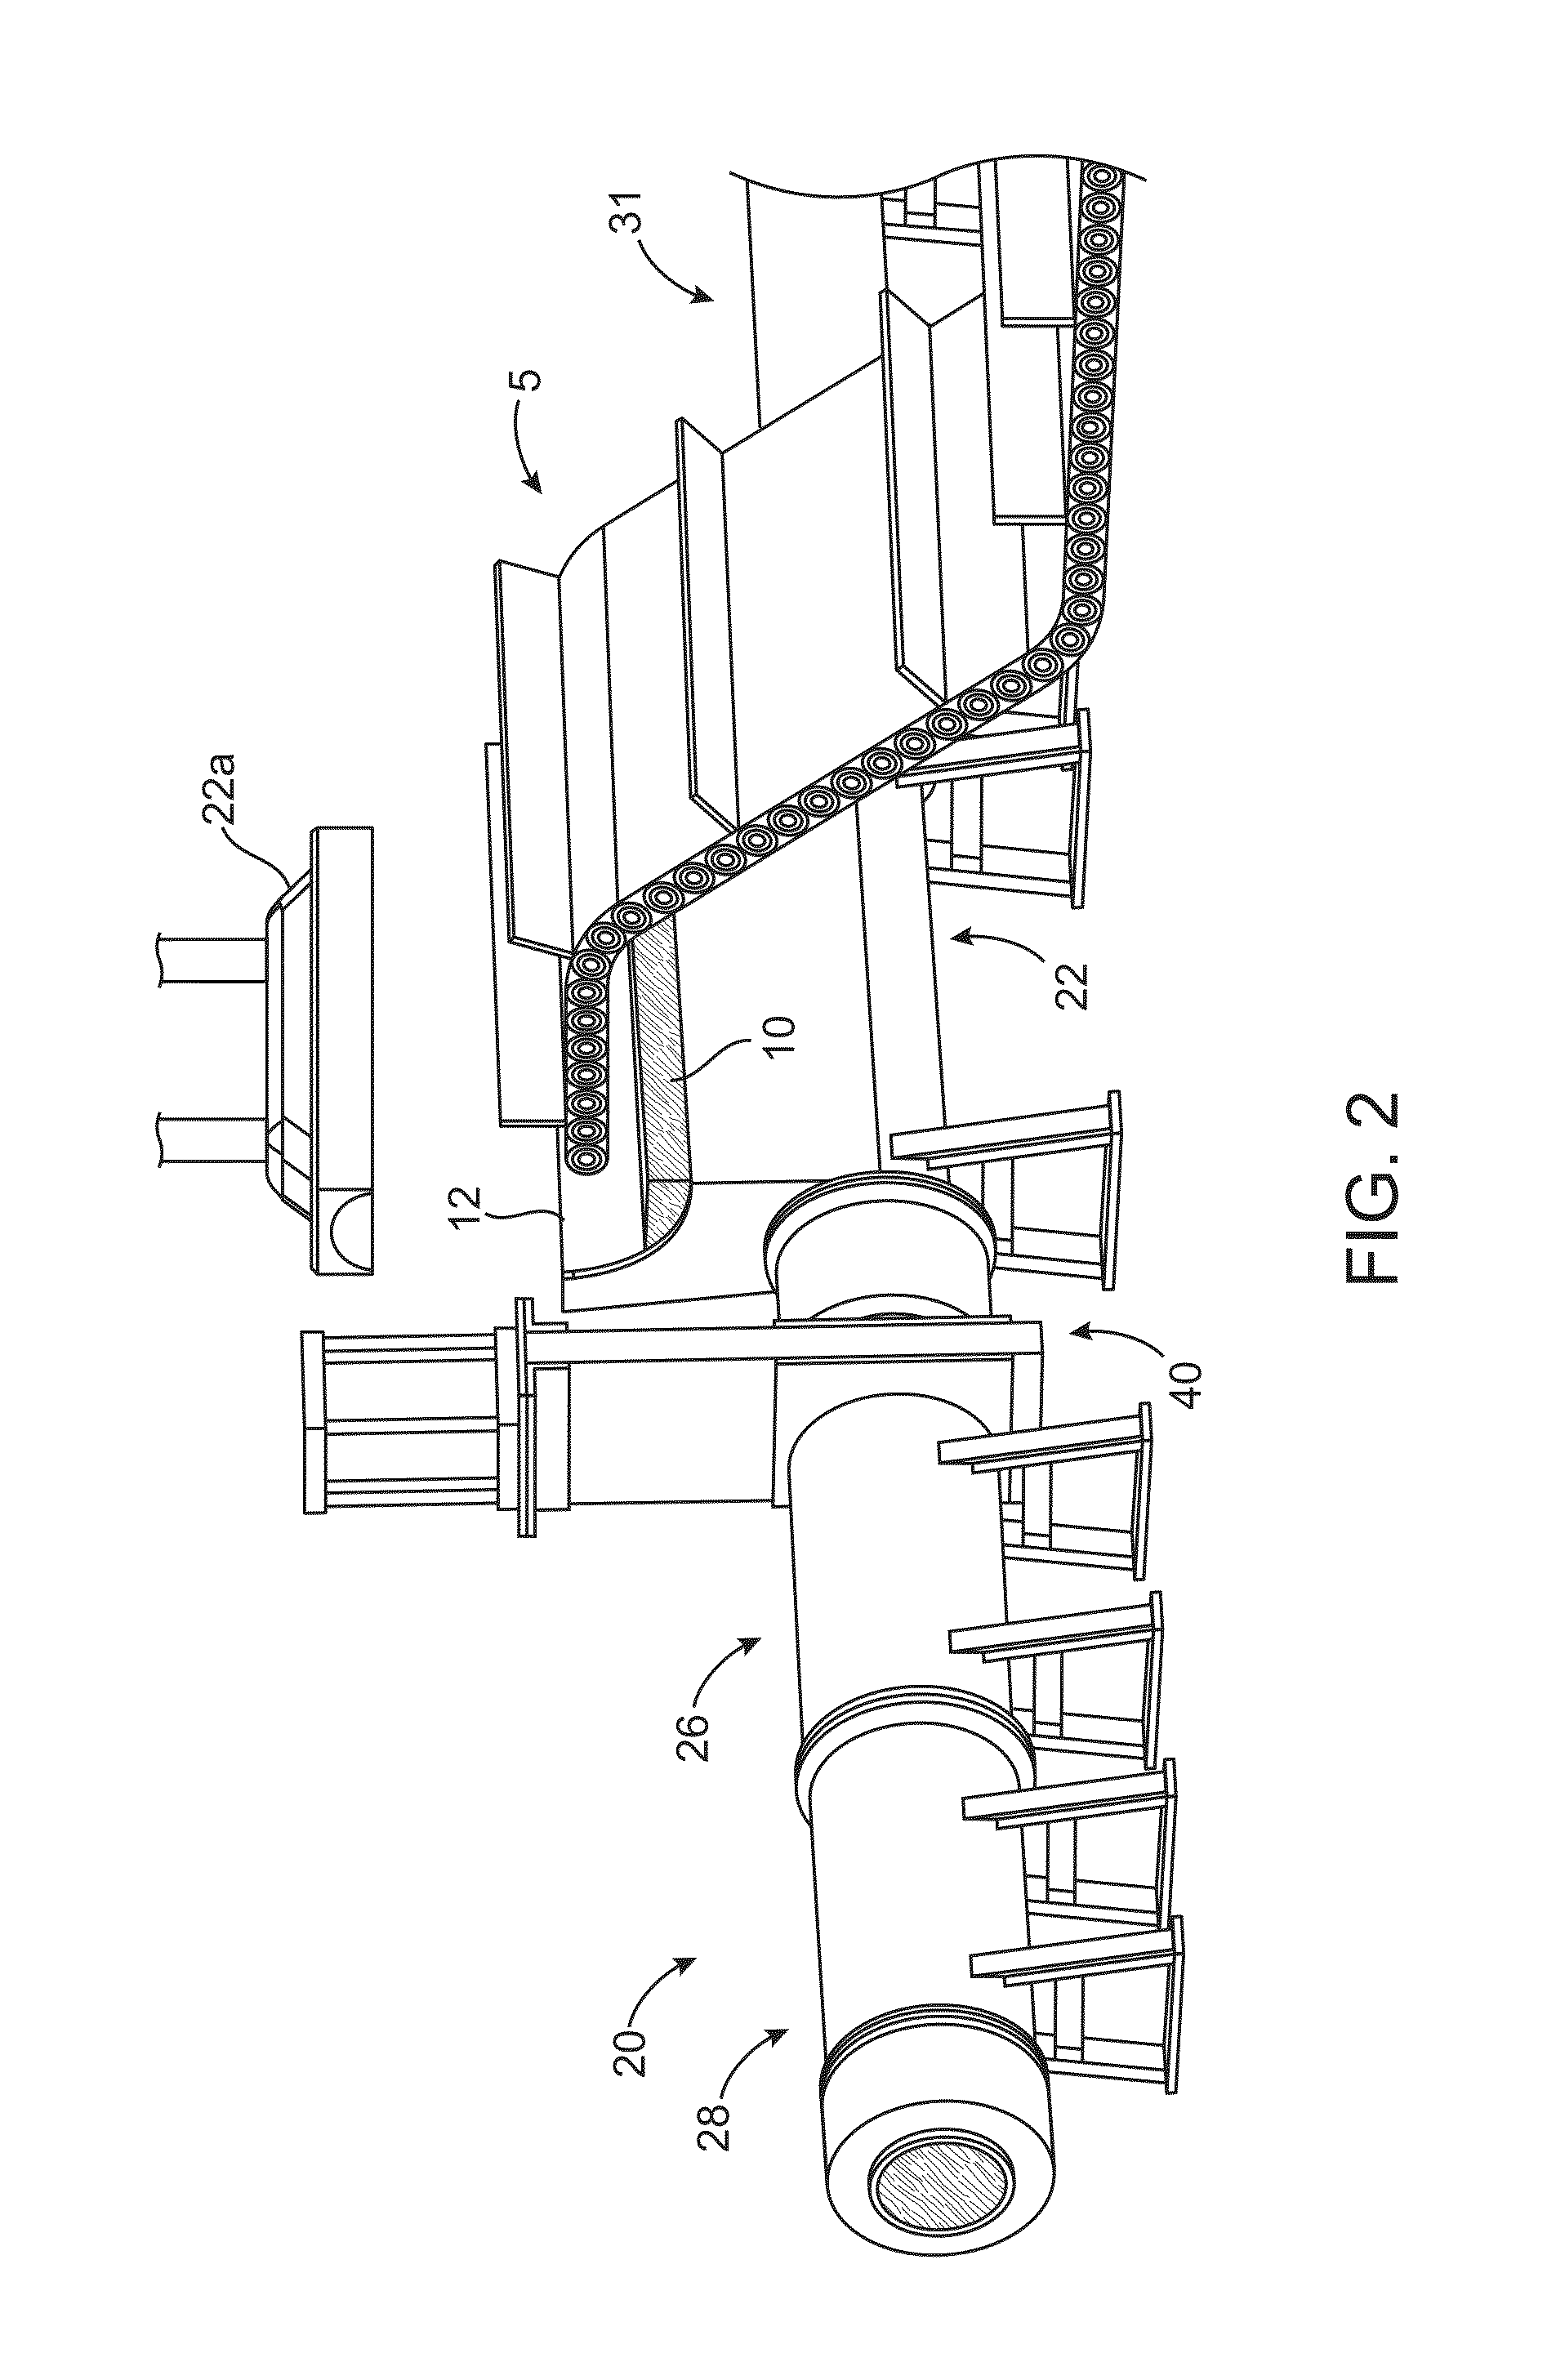 Method and Apparatus for Material Densification